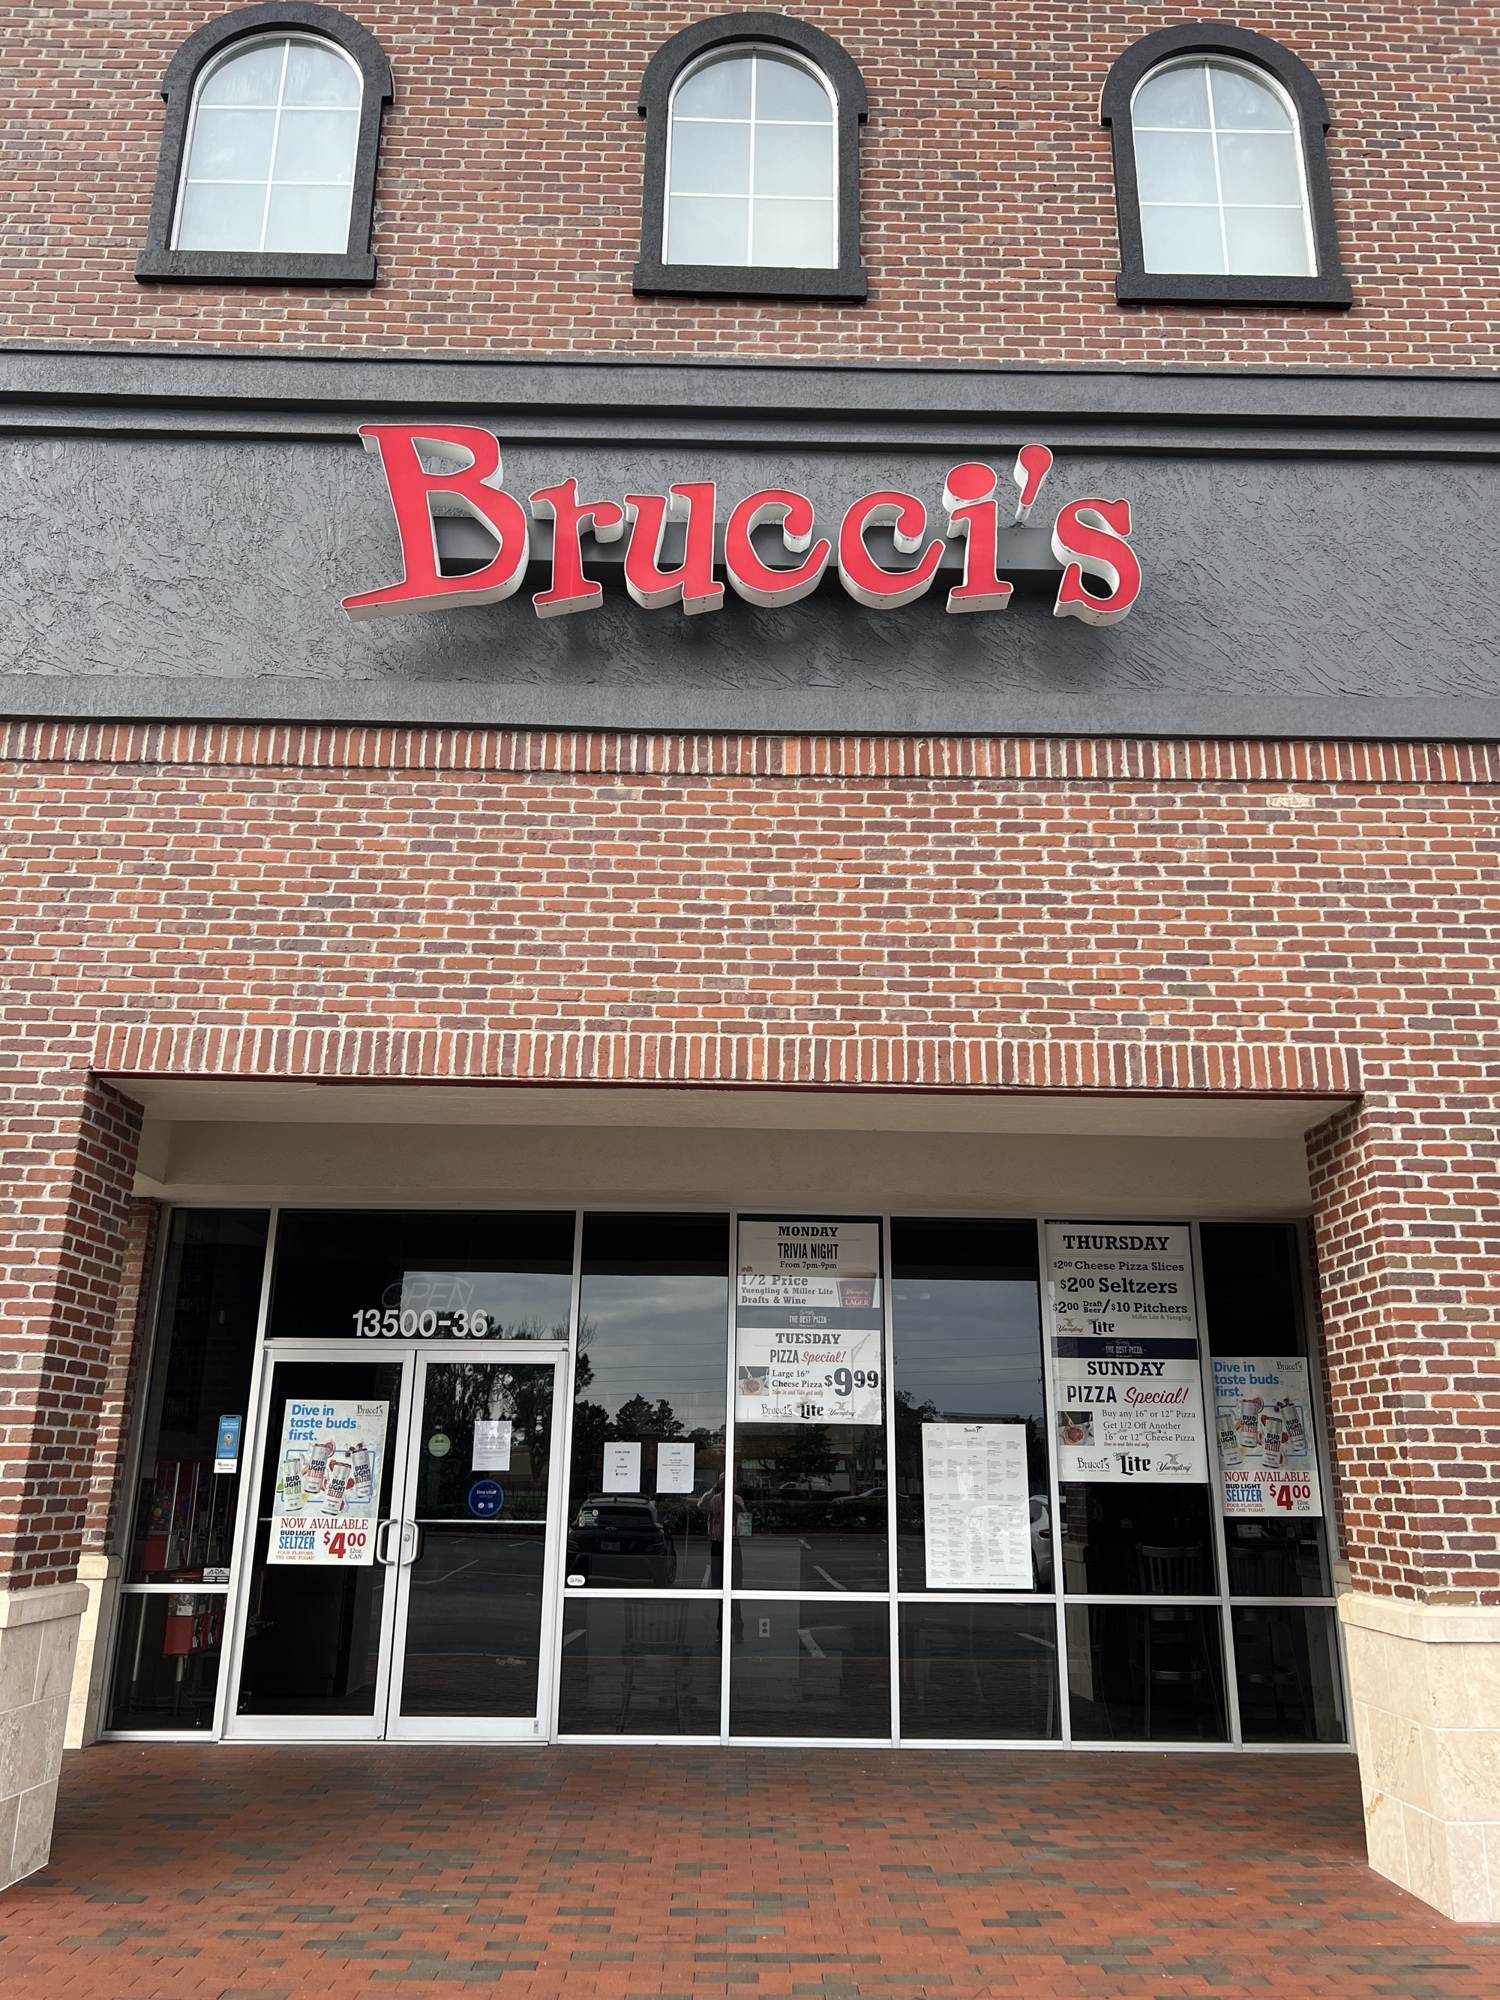 There were once five Brucci’s Pizza restaurants in Northeast Florida. There are all now closed.